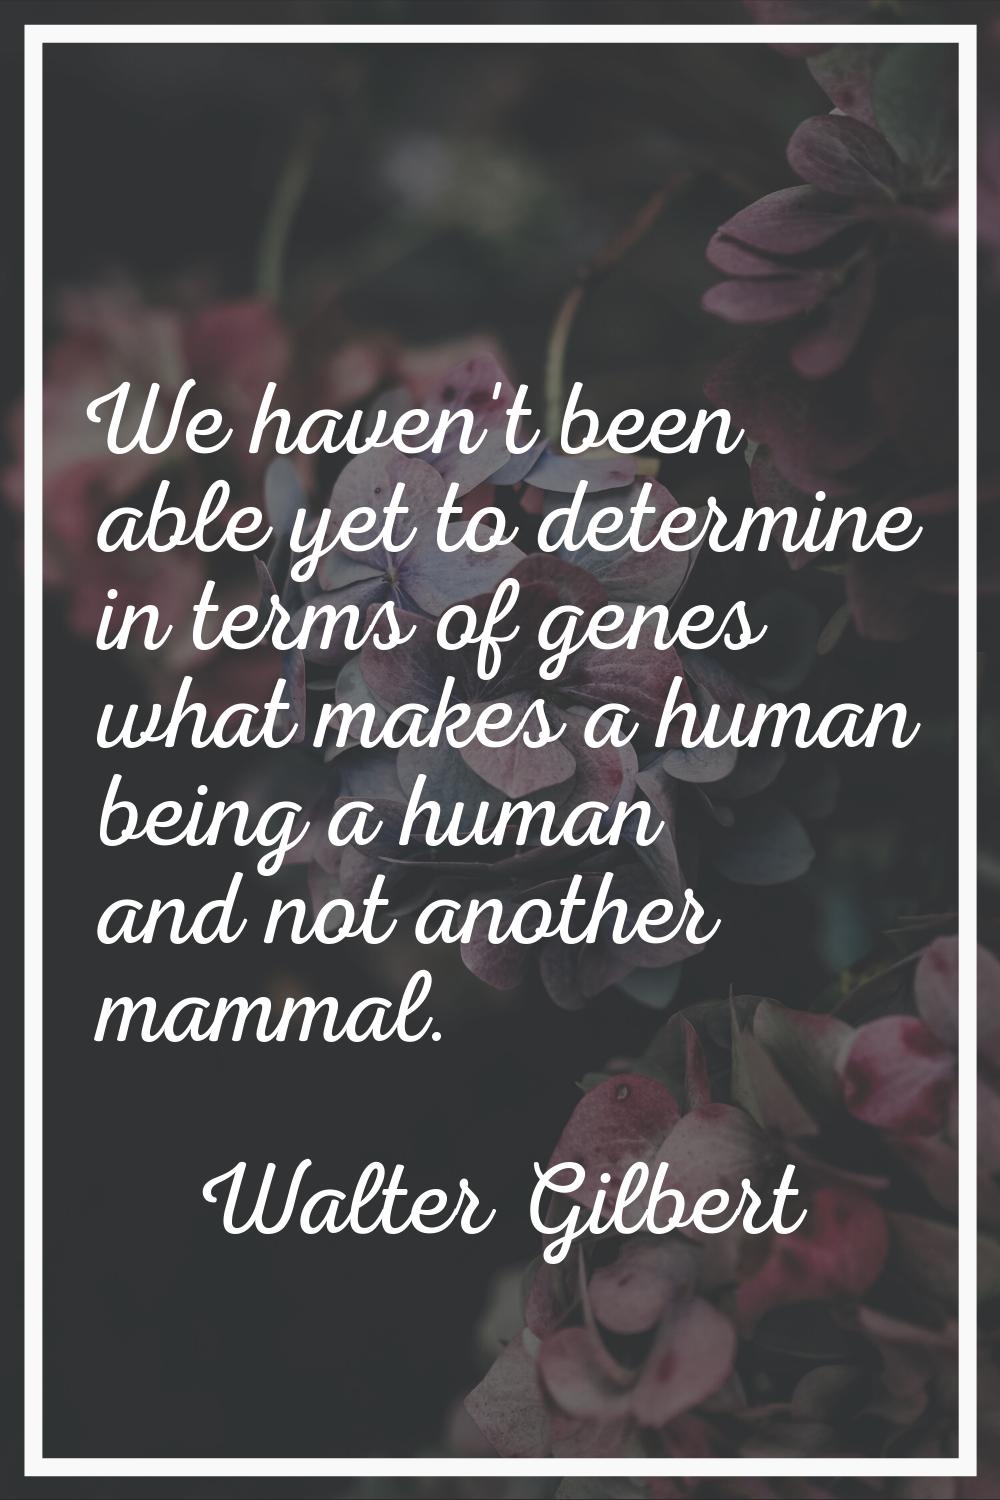 We haven't been able yet to determine in terms of genes what makes a human being a human and not an